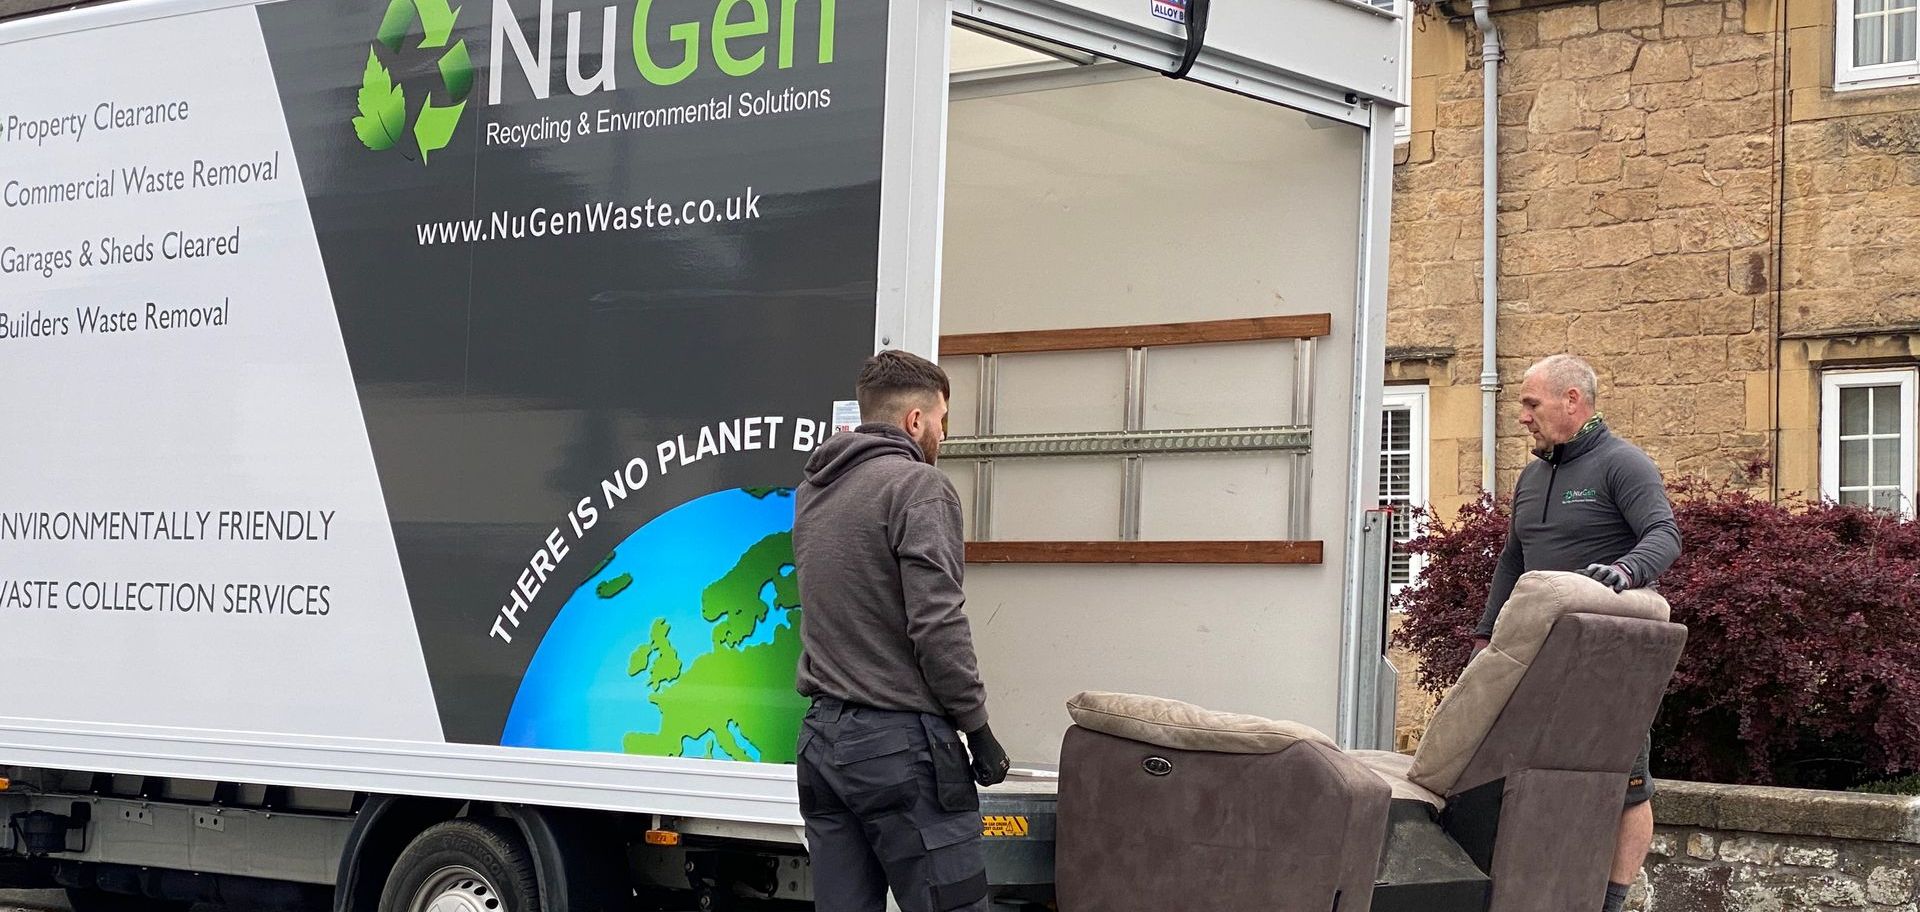 Dedicated NuGen Waste team members efficiently managing furniture removal with a commitment to safety and sustainability.